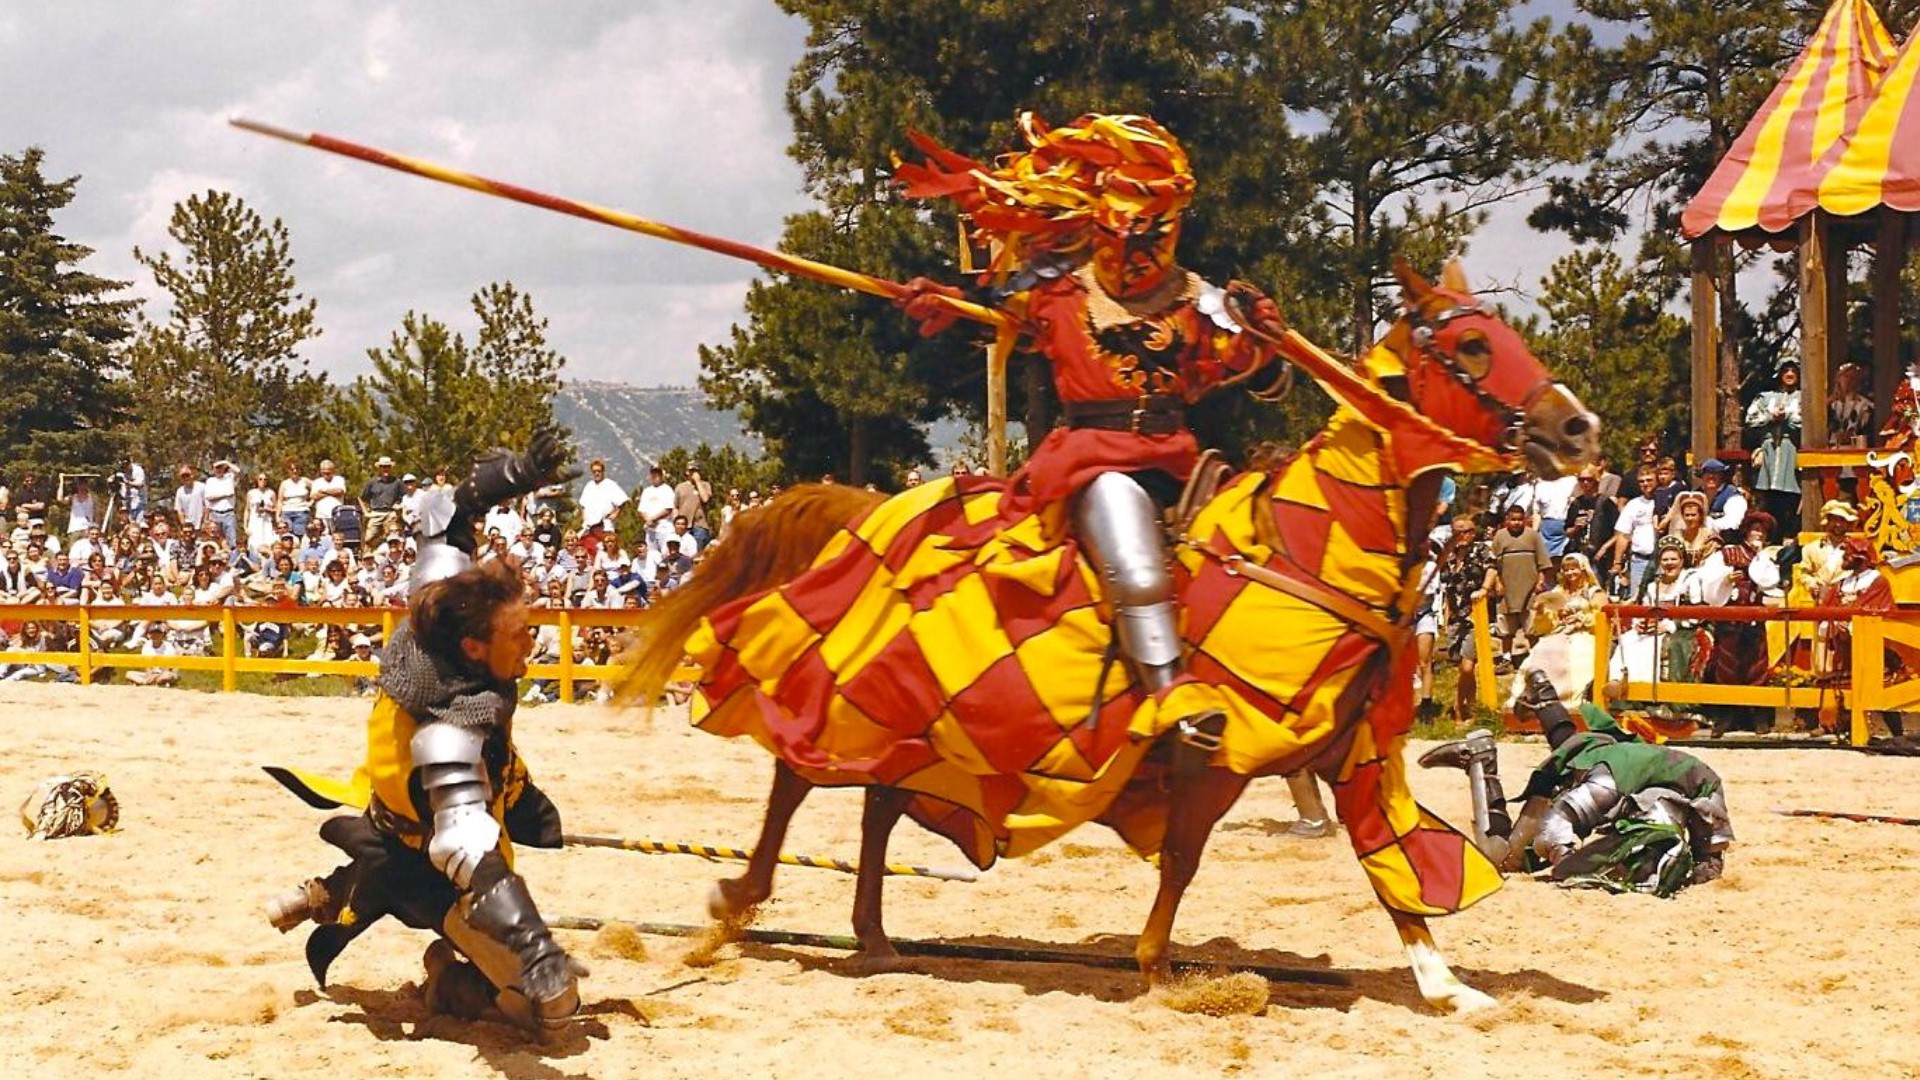 After a year off due to COVID-19, the Colorado Renaissance Festival returns with fun for the whole family in Larkspur, Colorado.